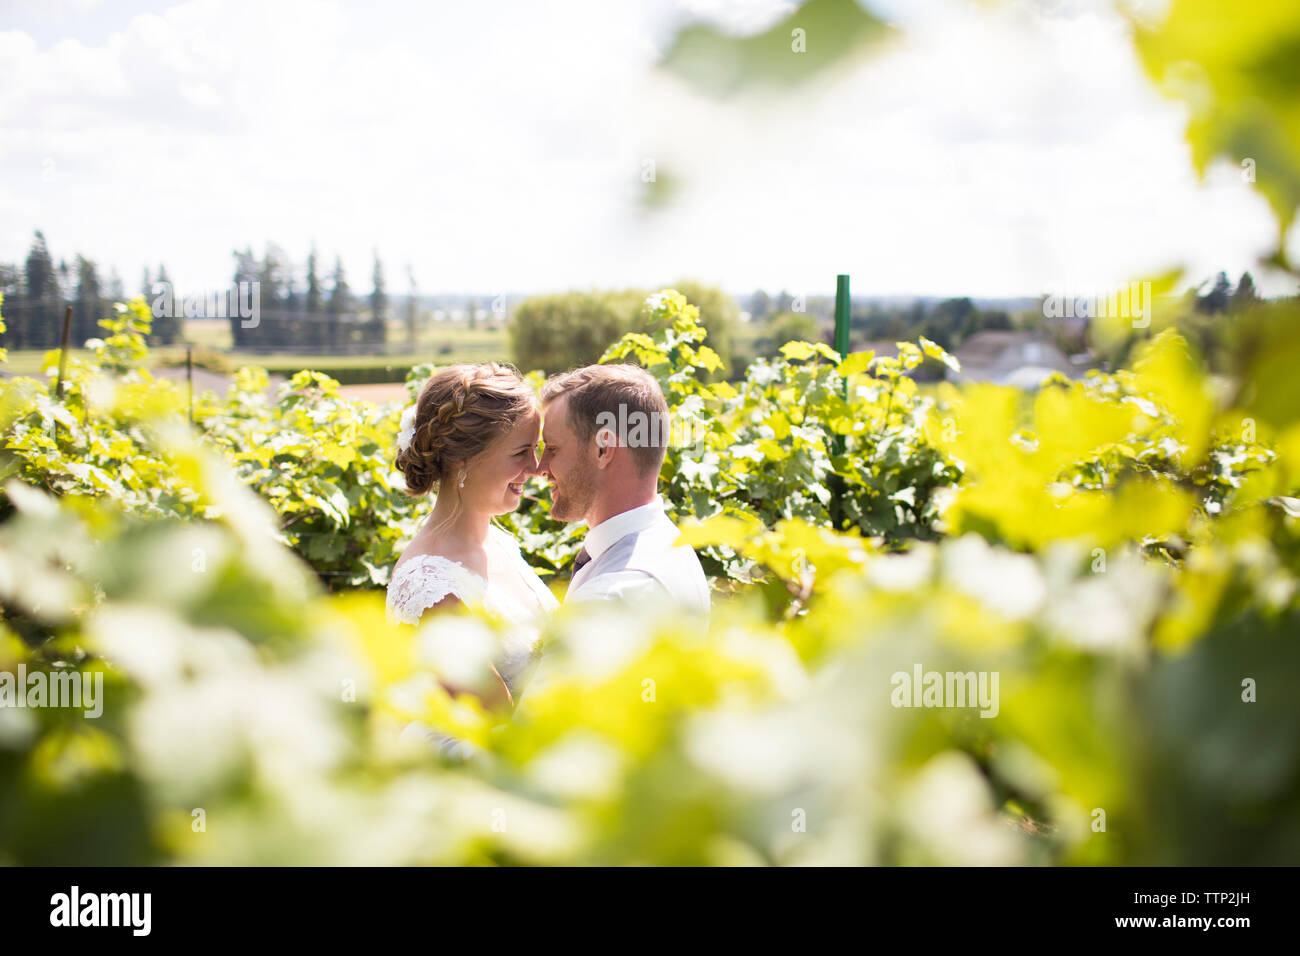 Happy newlywed couple rubbing noses amidst plants at field Stock Photo